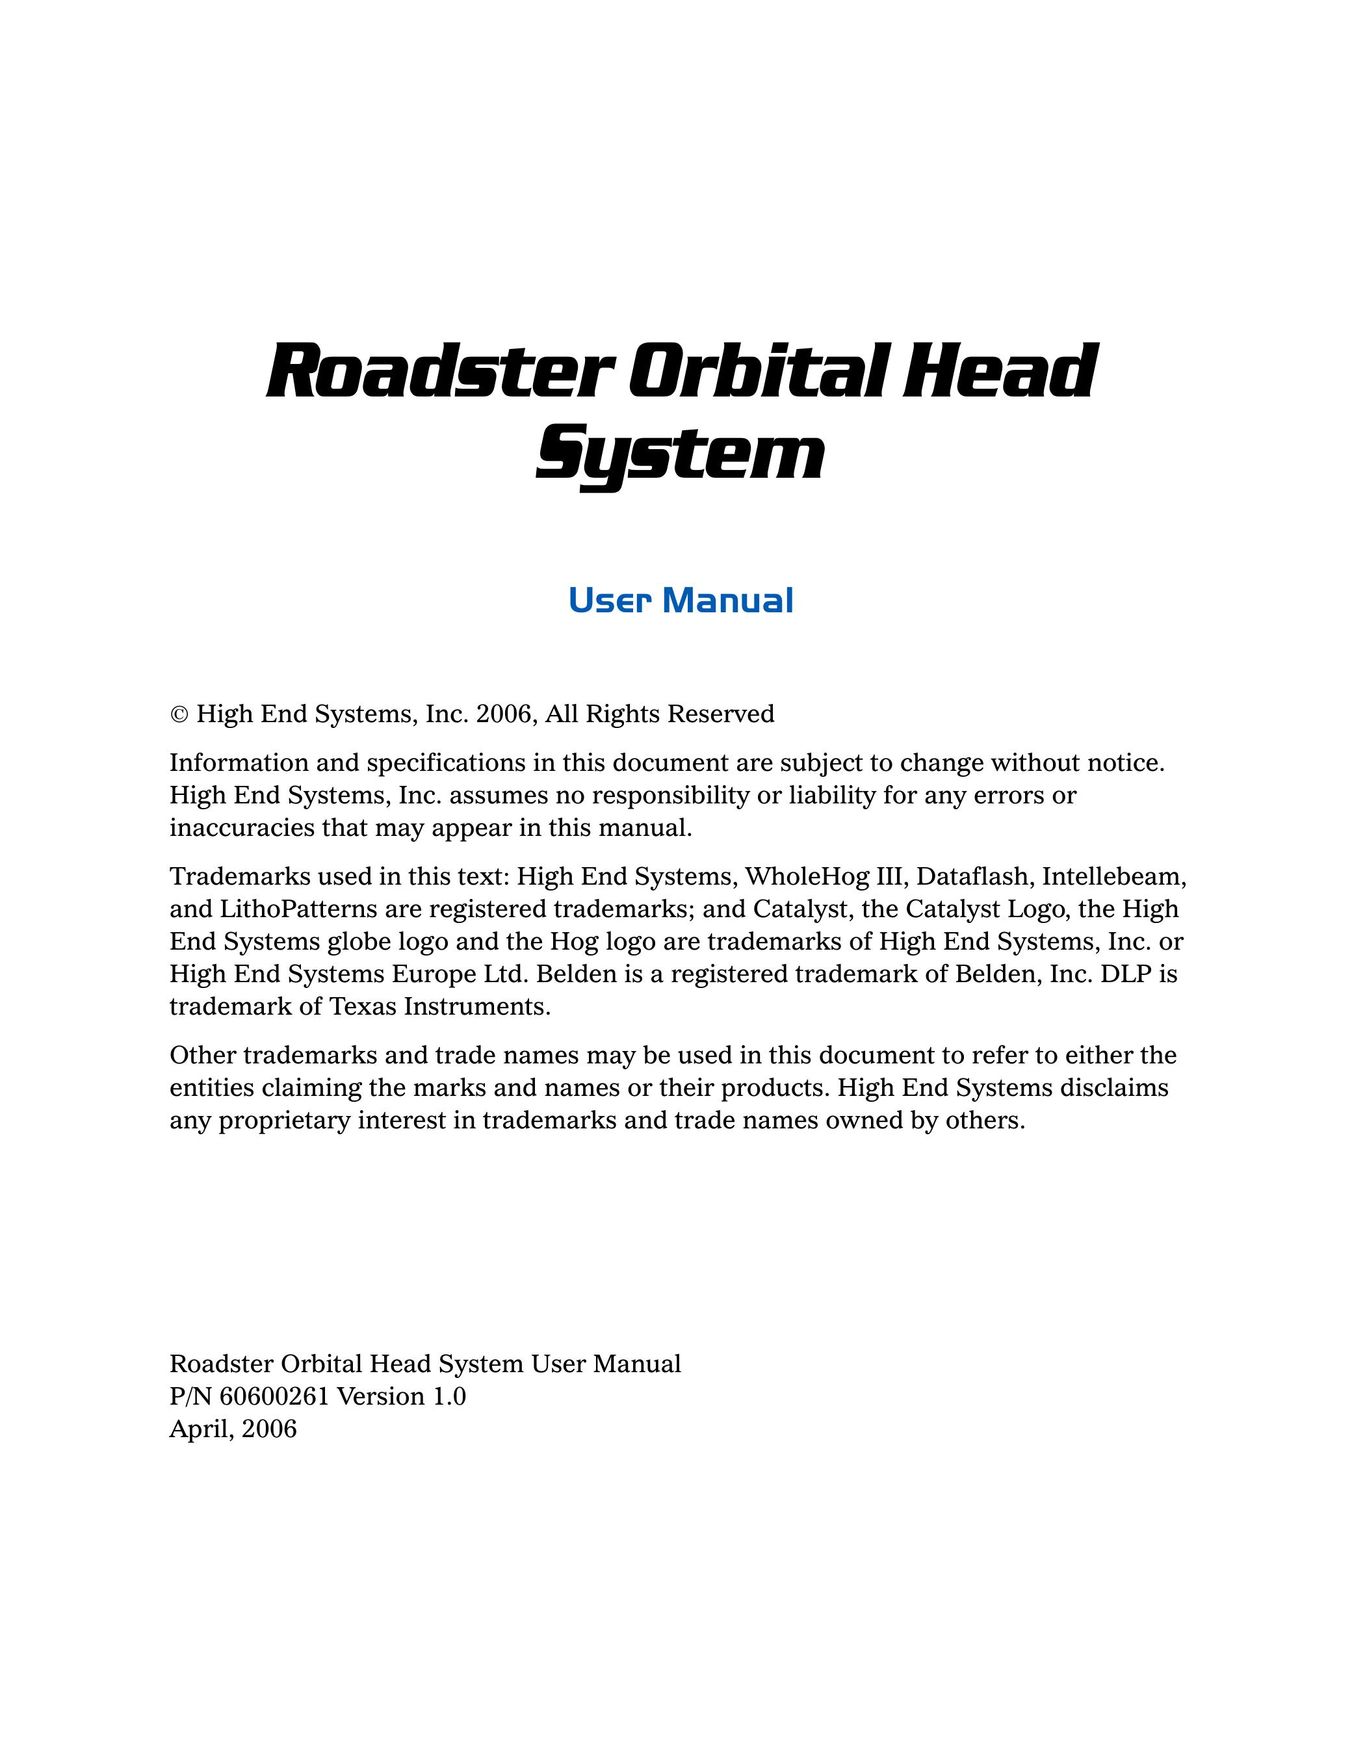 High End Systems Roadster Orbital Head System Projector User Manual